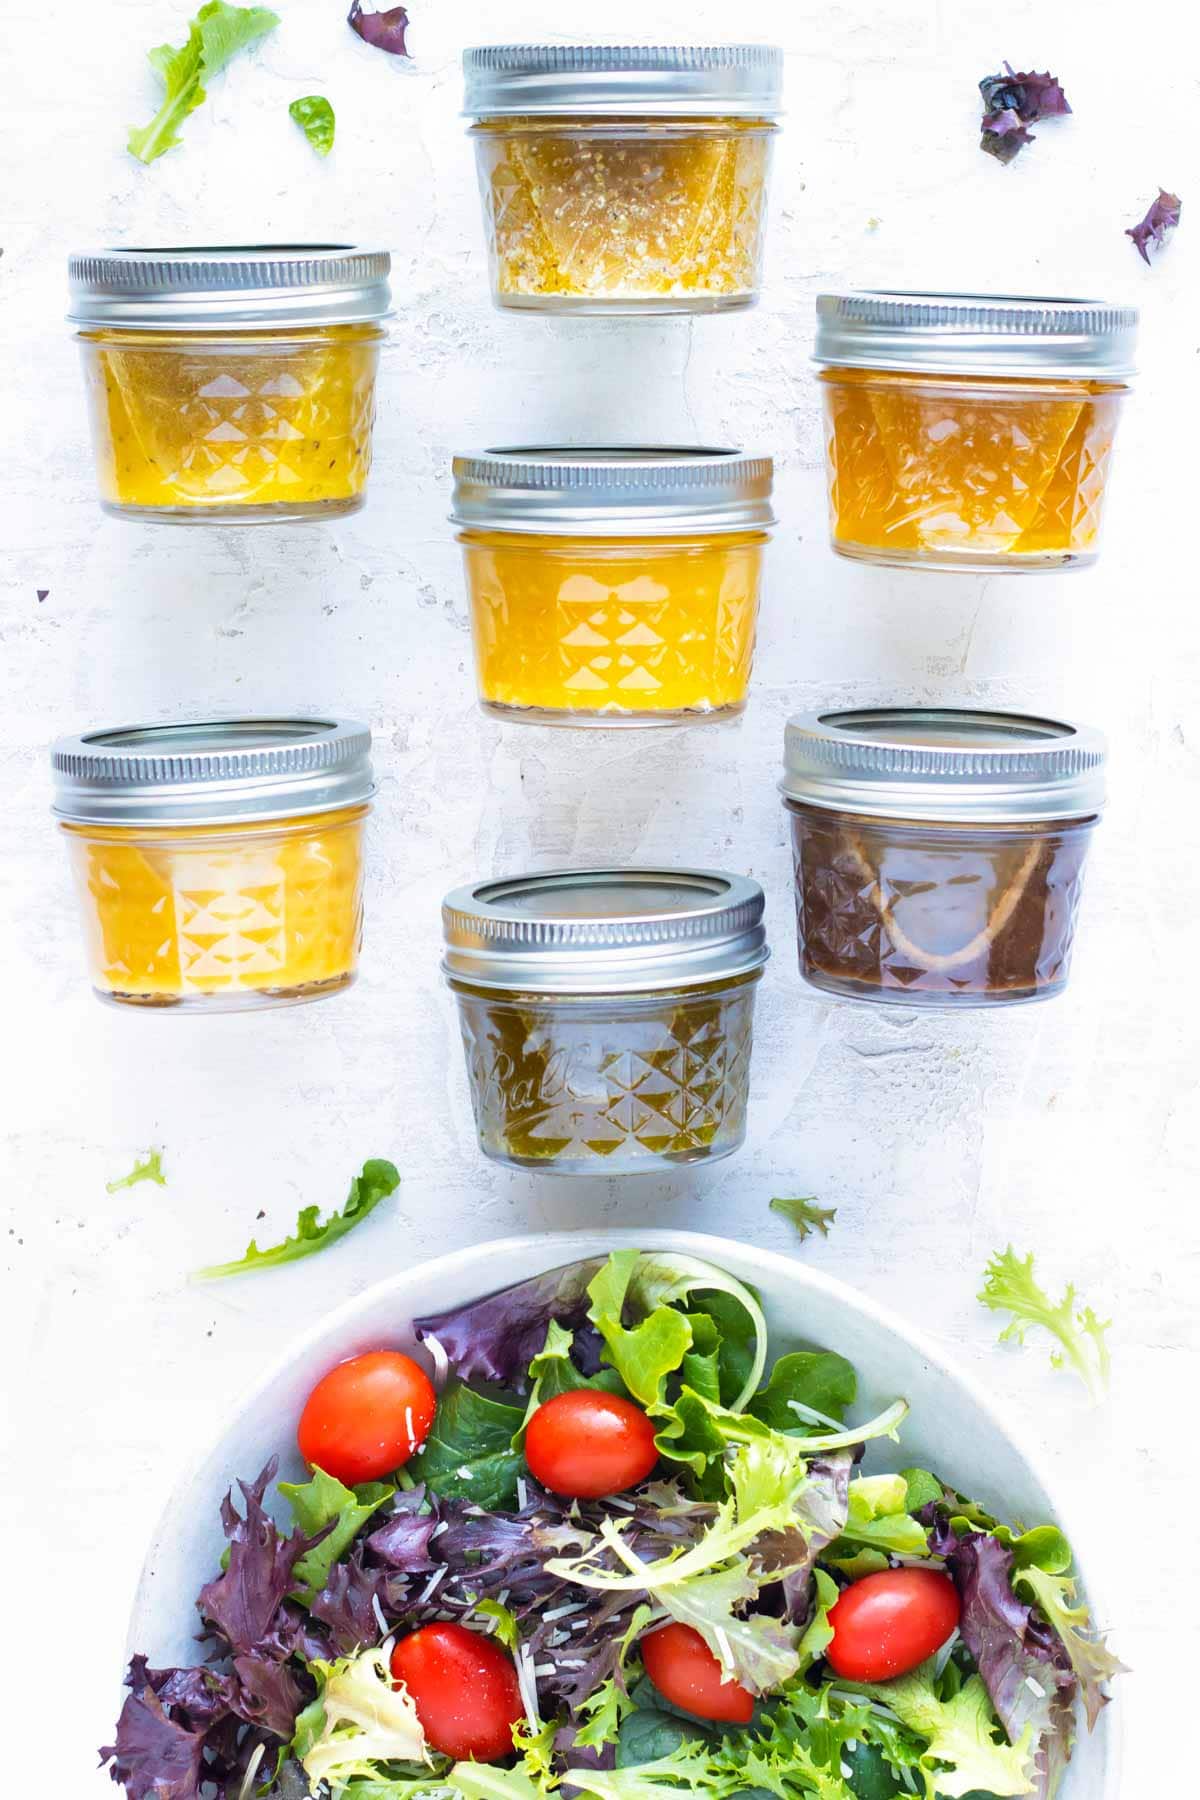 Seven healthy salad dressing recipes in mason jar containers next to a spinach and arugula salad.